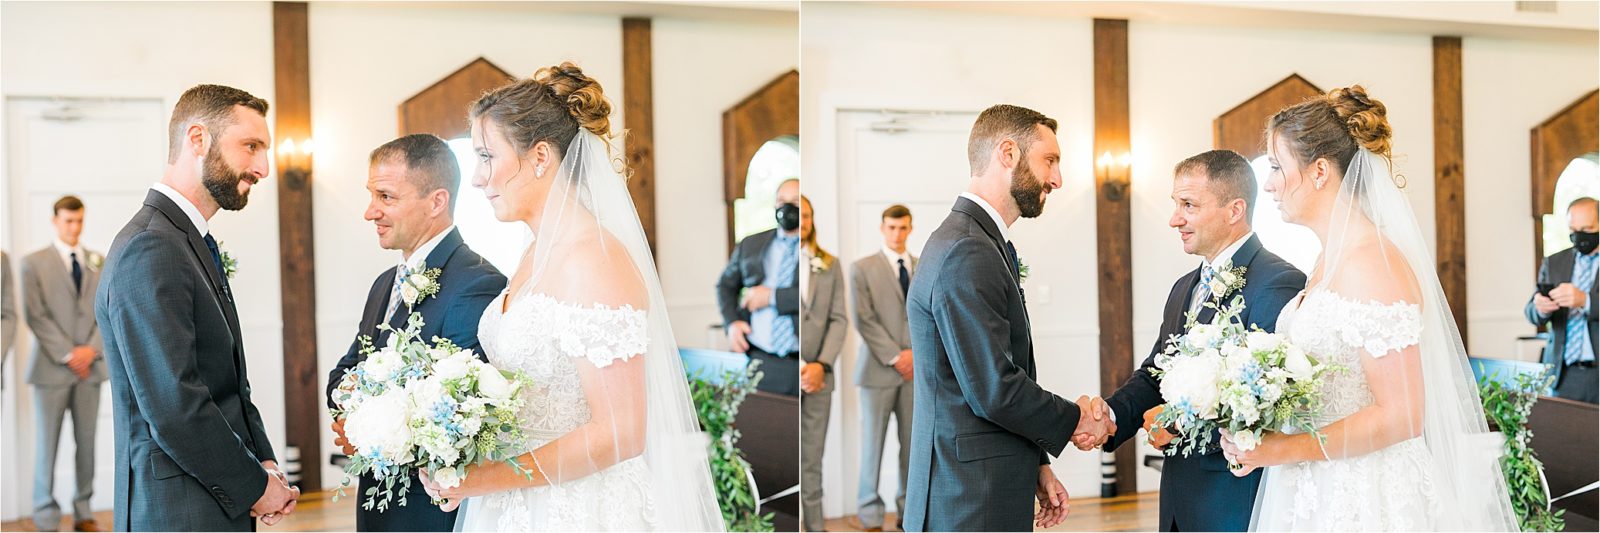 A groom makes eye contact with his bride and shakes her father's hand as he gives her away during her Rustic Grace Estate Wedding Ceremony near McKinney, TX.